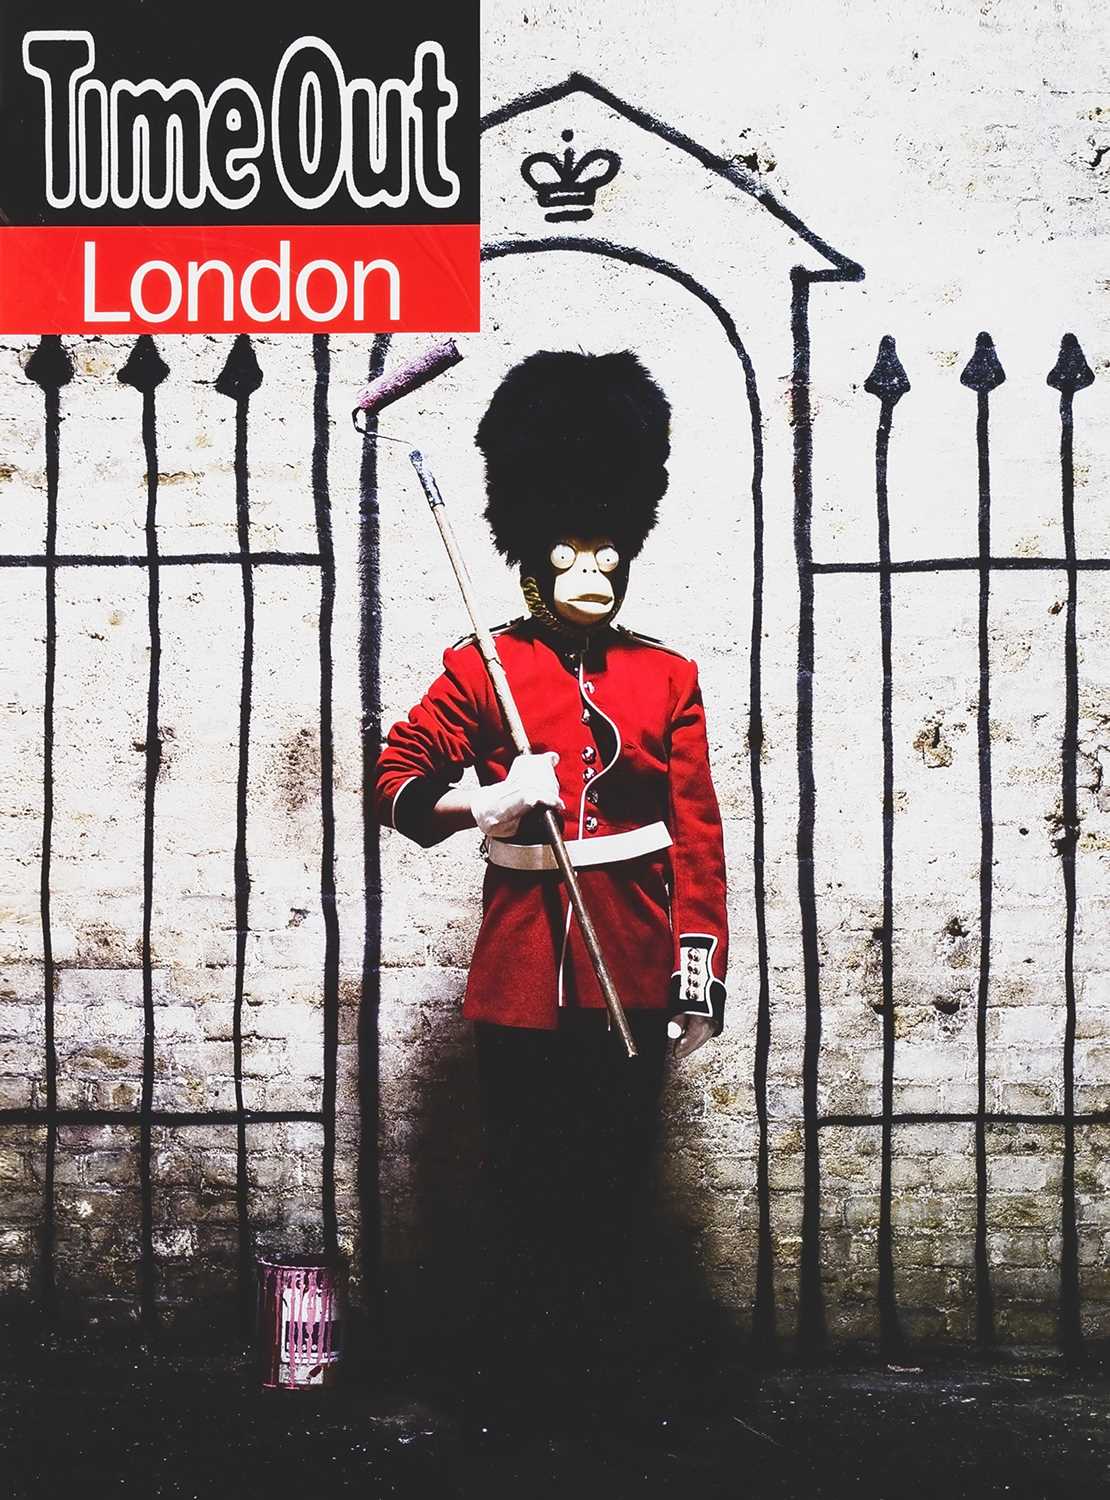 Lot 83 - Banksy (British 1974-), 'Time Out London', 2010